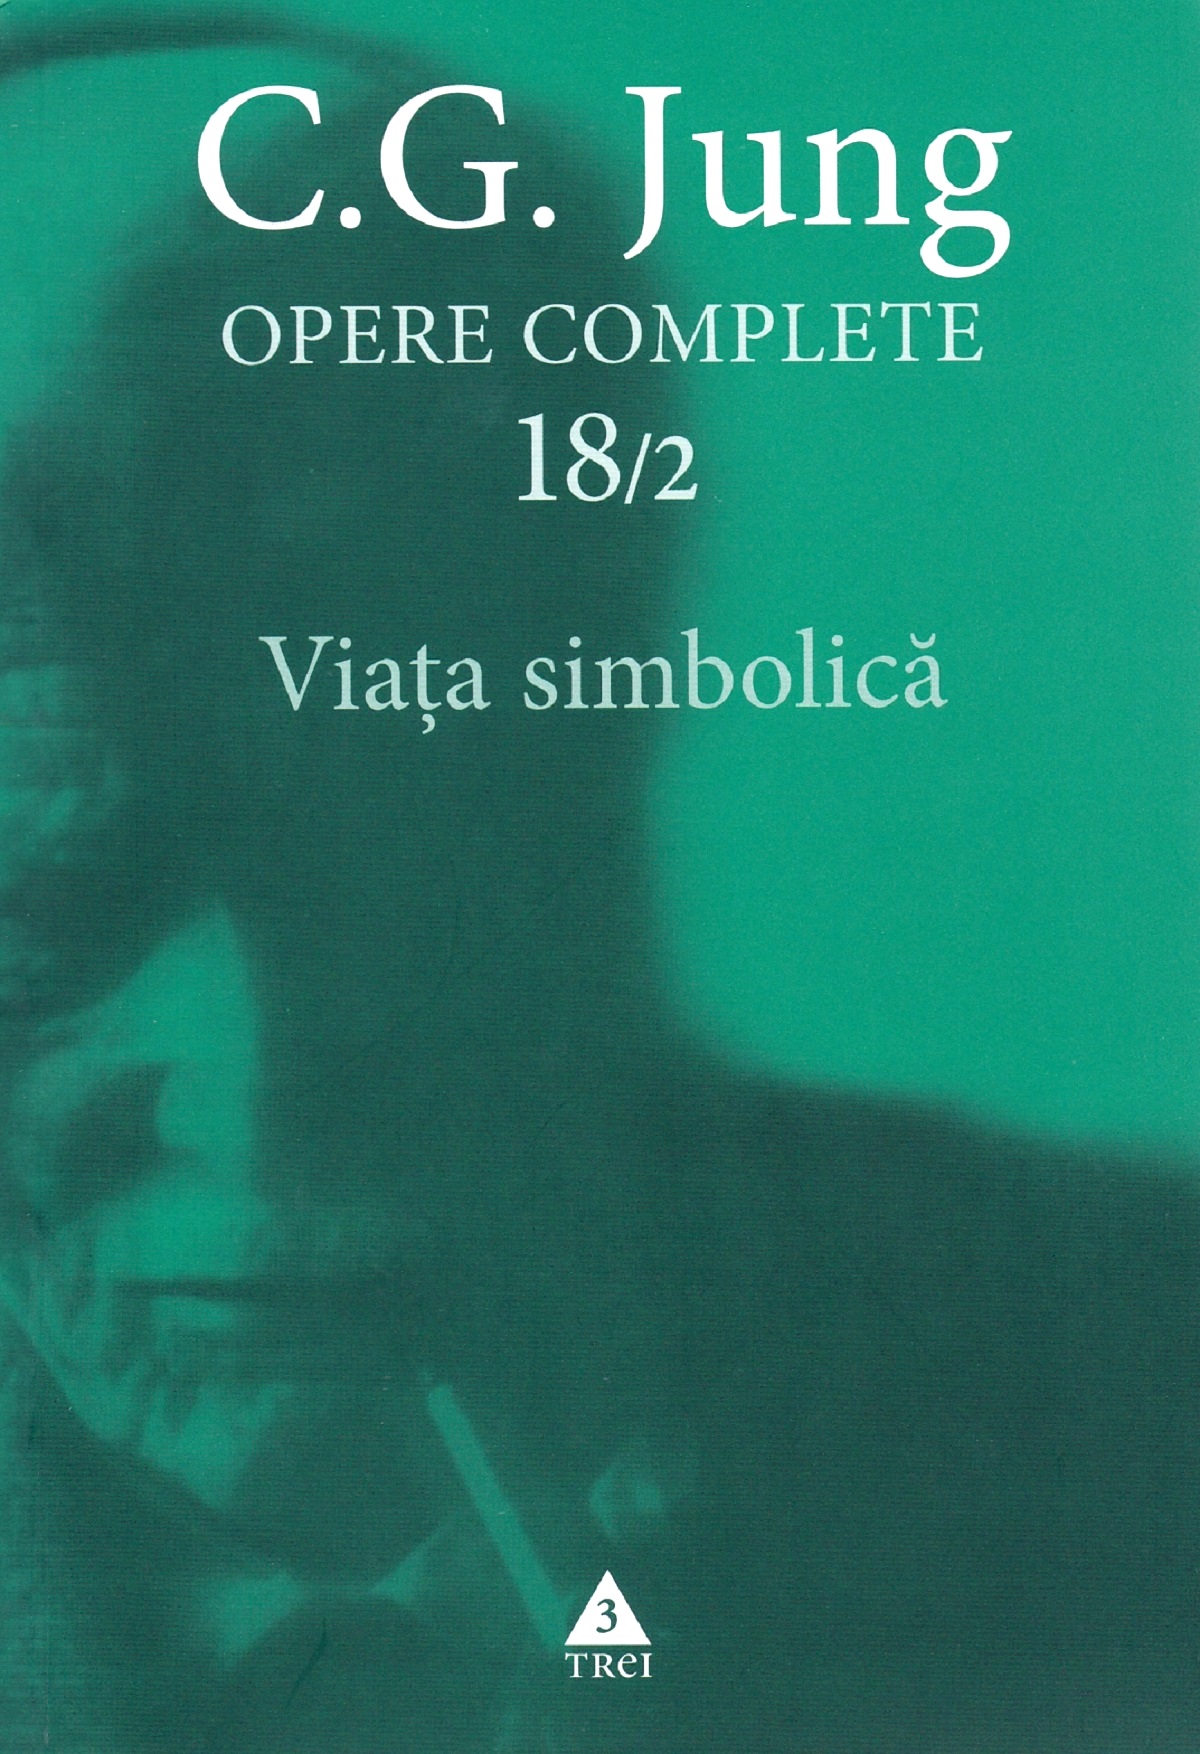 Opere complete 18/2 | C.G. Jung carturesti.ro poza bestsellers.ro